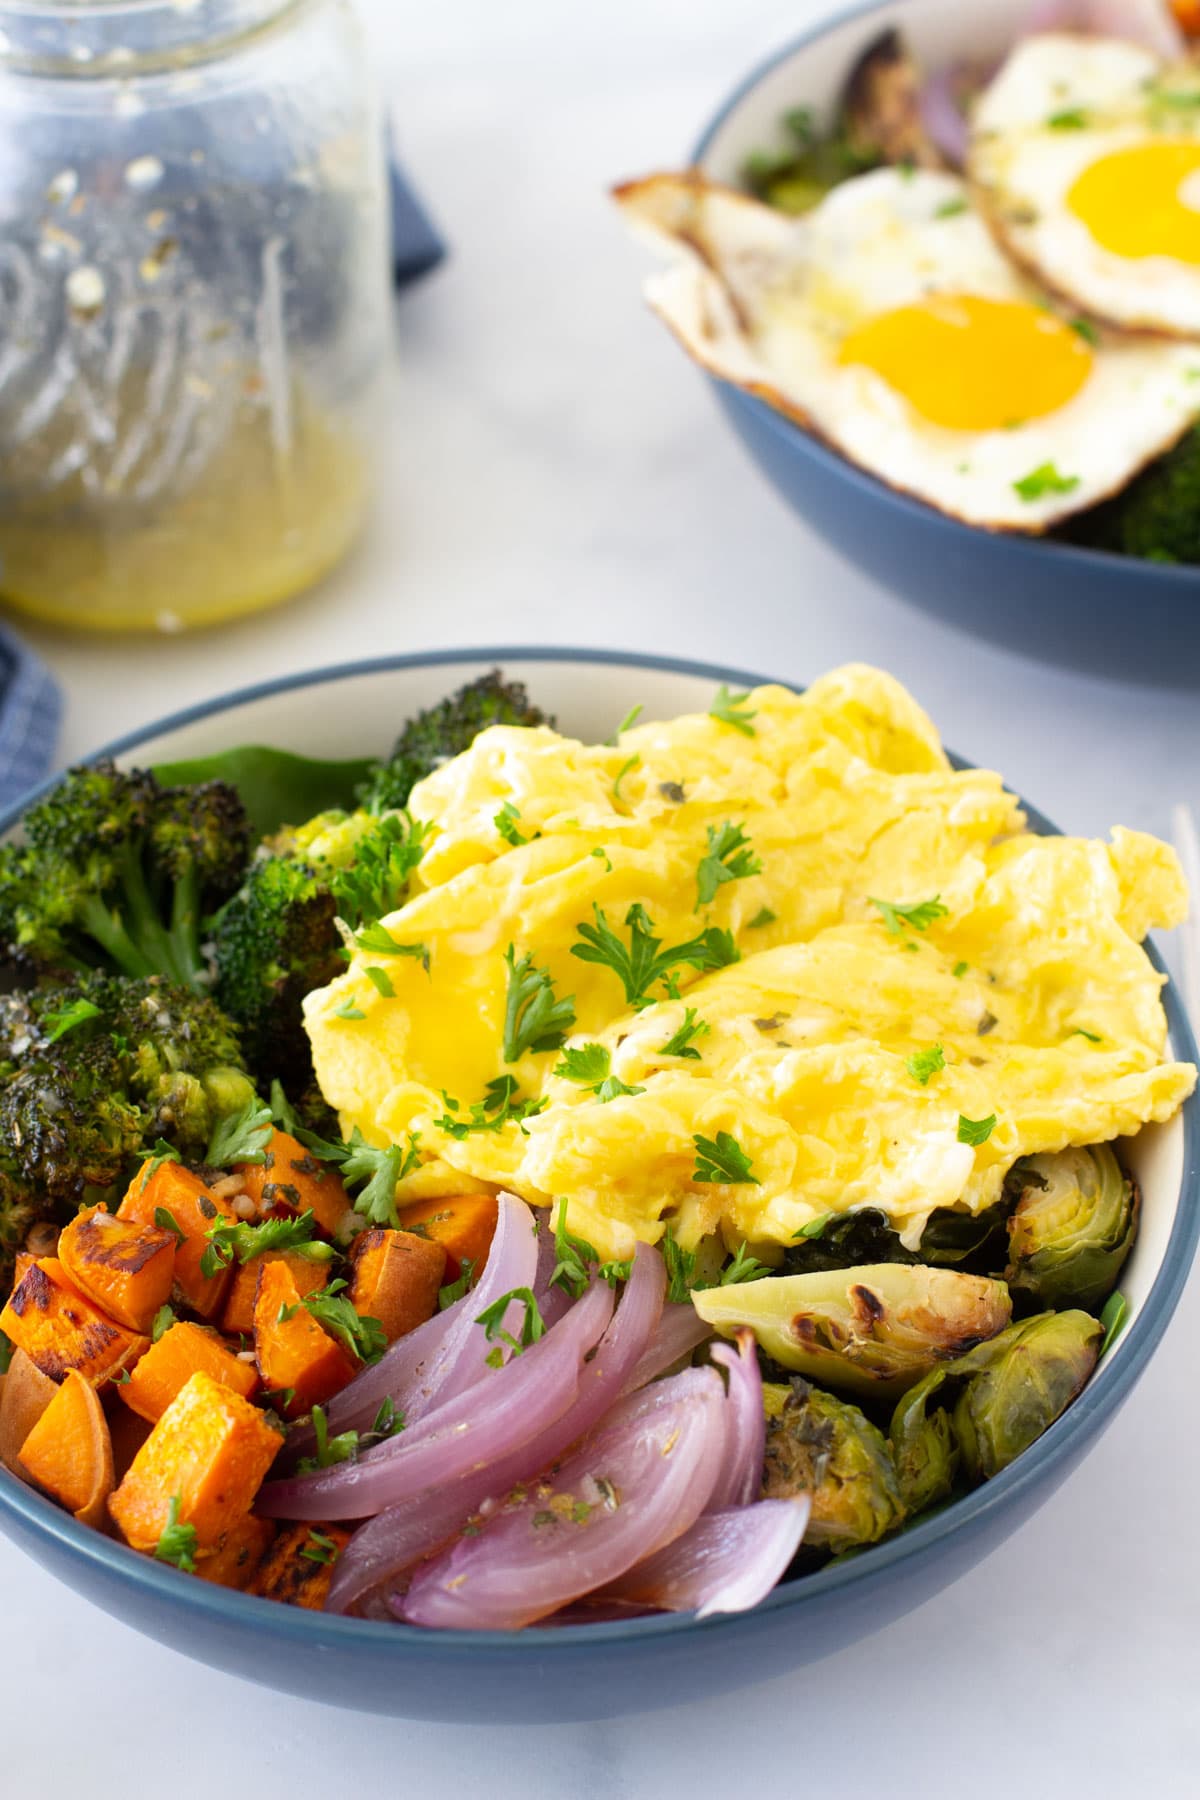 soft scrambled eggs with brussel sprouts broccoli and sweet potatoes